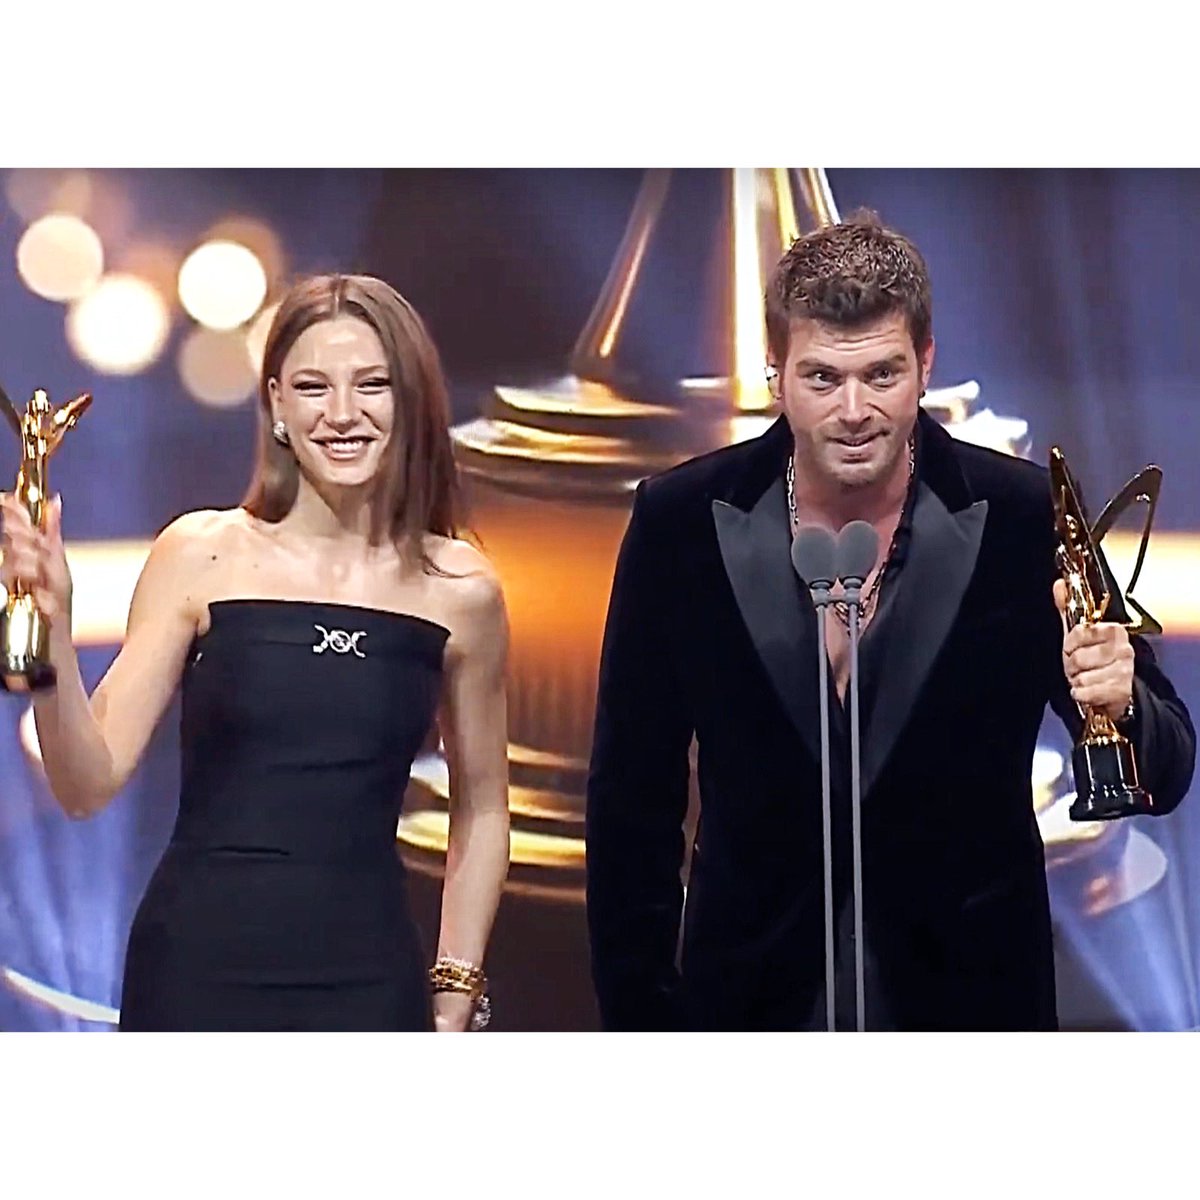 Congratulations to #KivançTatlitug and #SerenaySarikaya for winning a well deserved Best Couple Award tonight. It’s such a delight to watch their excellent acting, their ability to express emotions and their magnetic chemistry! Stay tuned for the subtitled speech and interview.